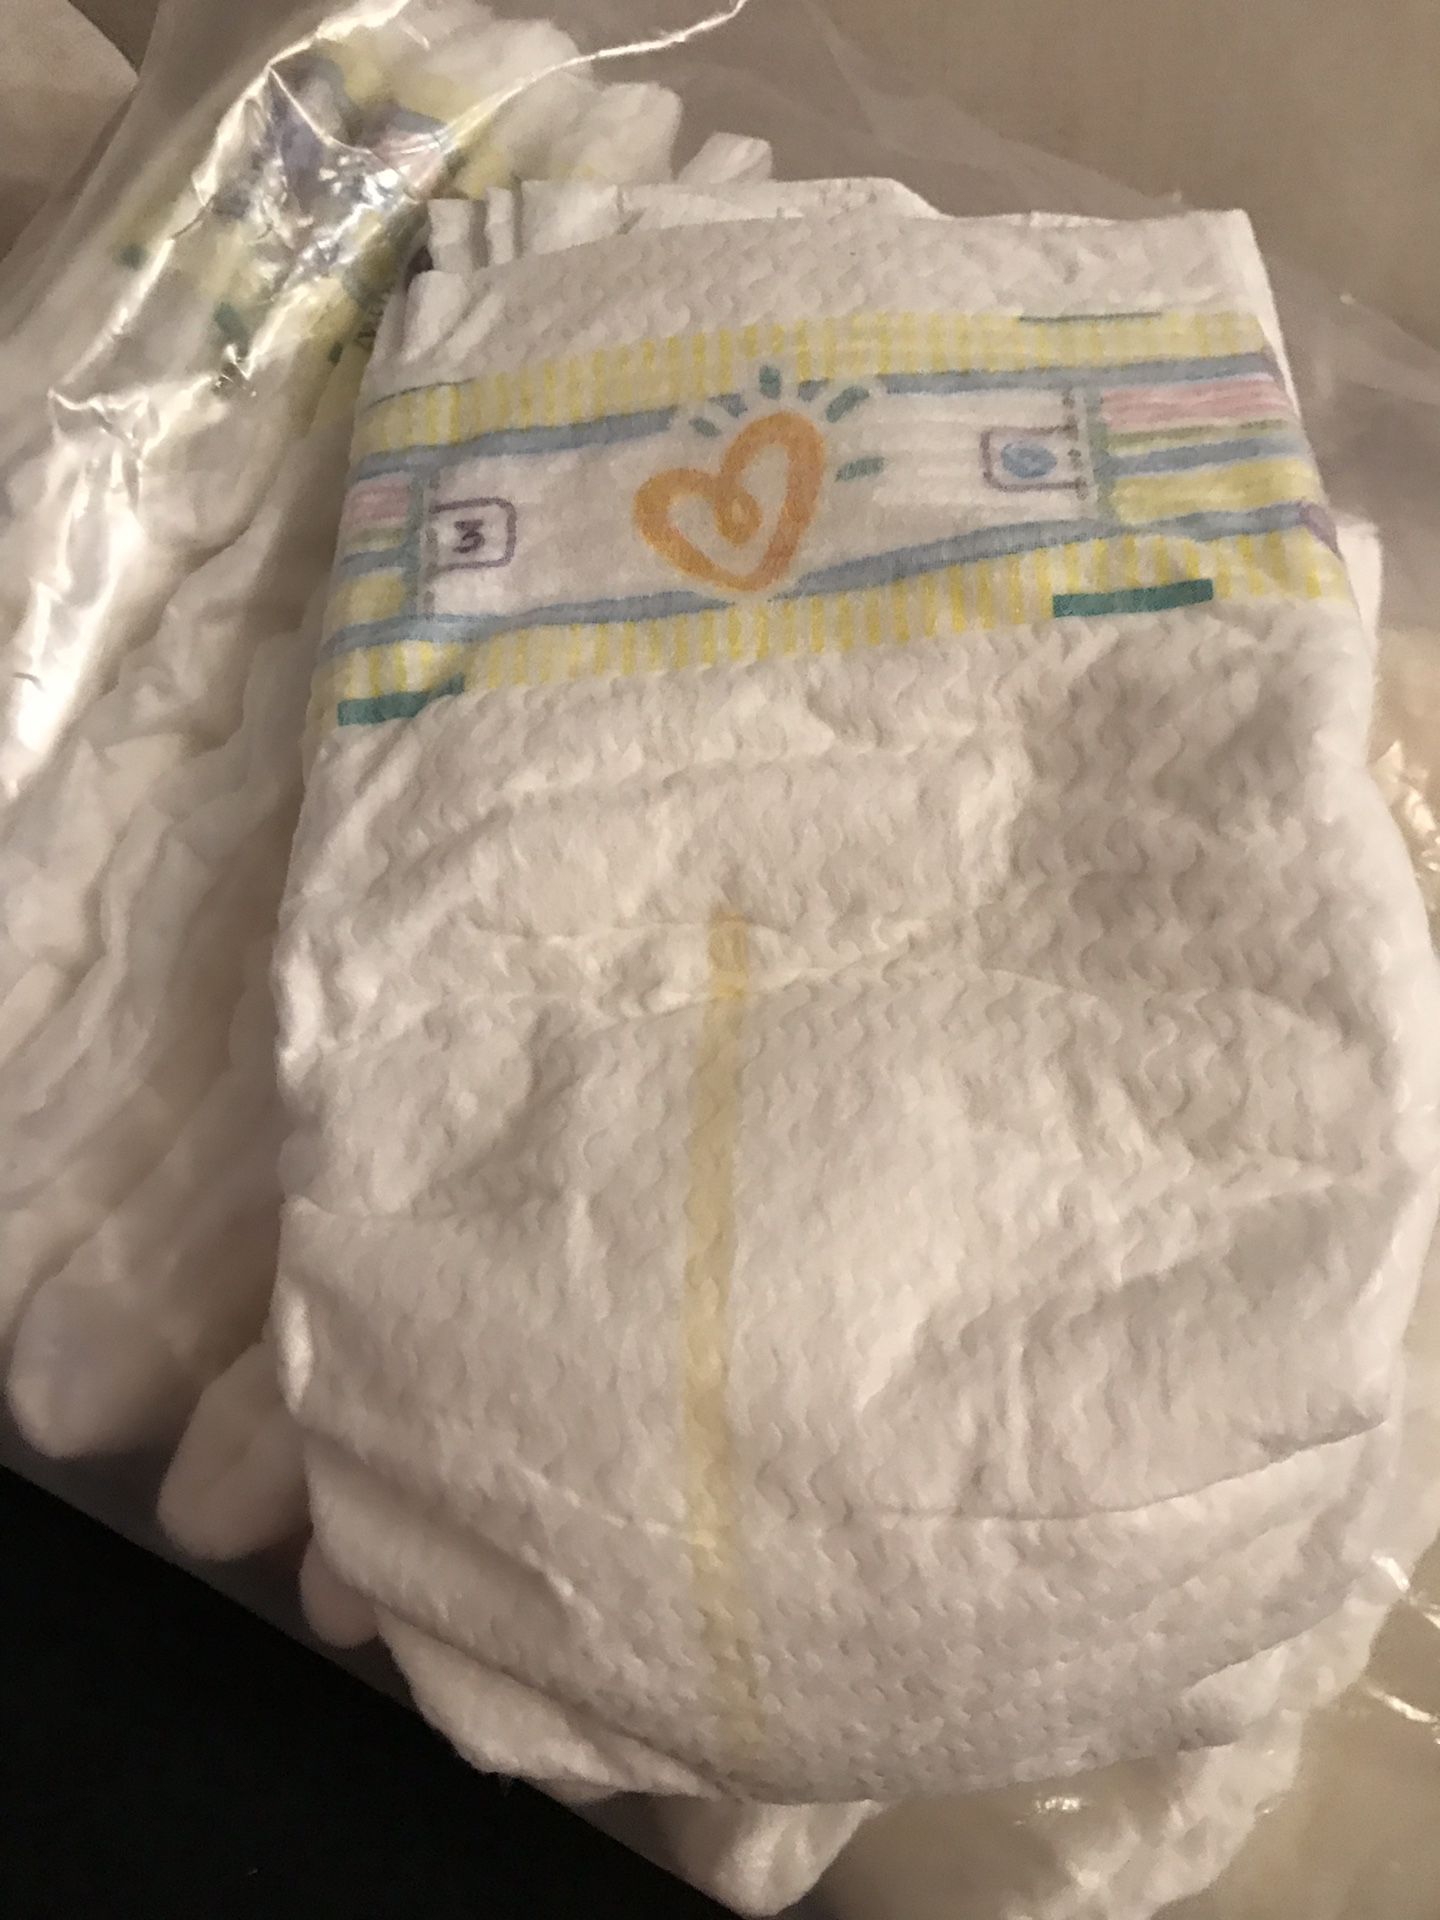 Size 3 pampers diapers